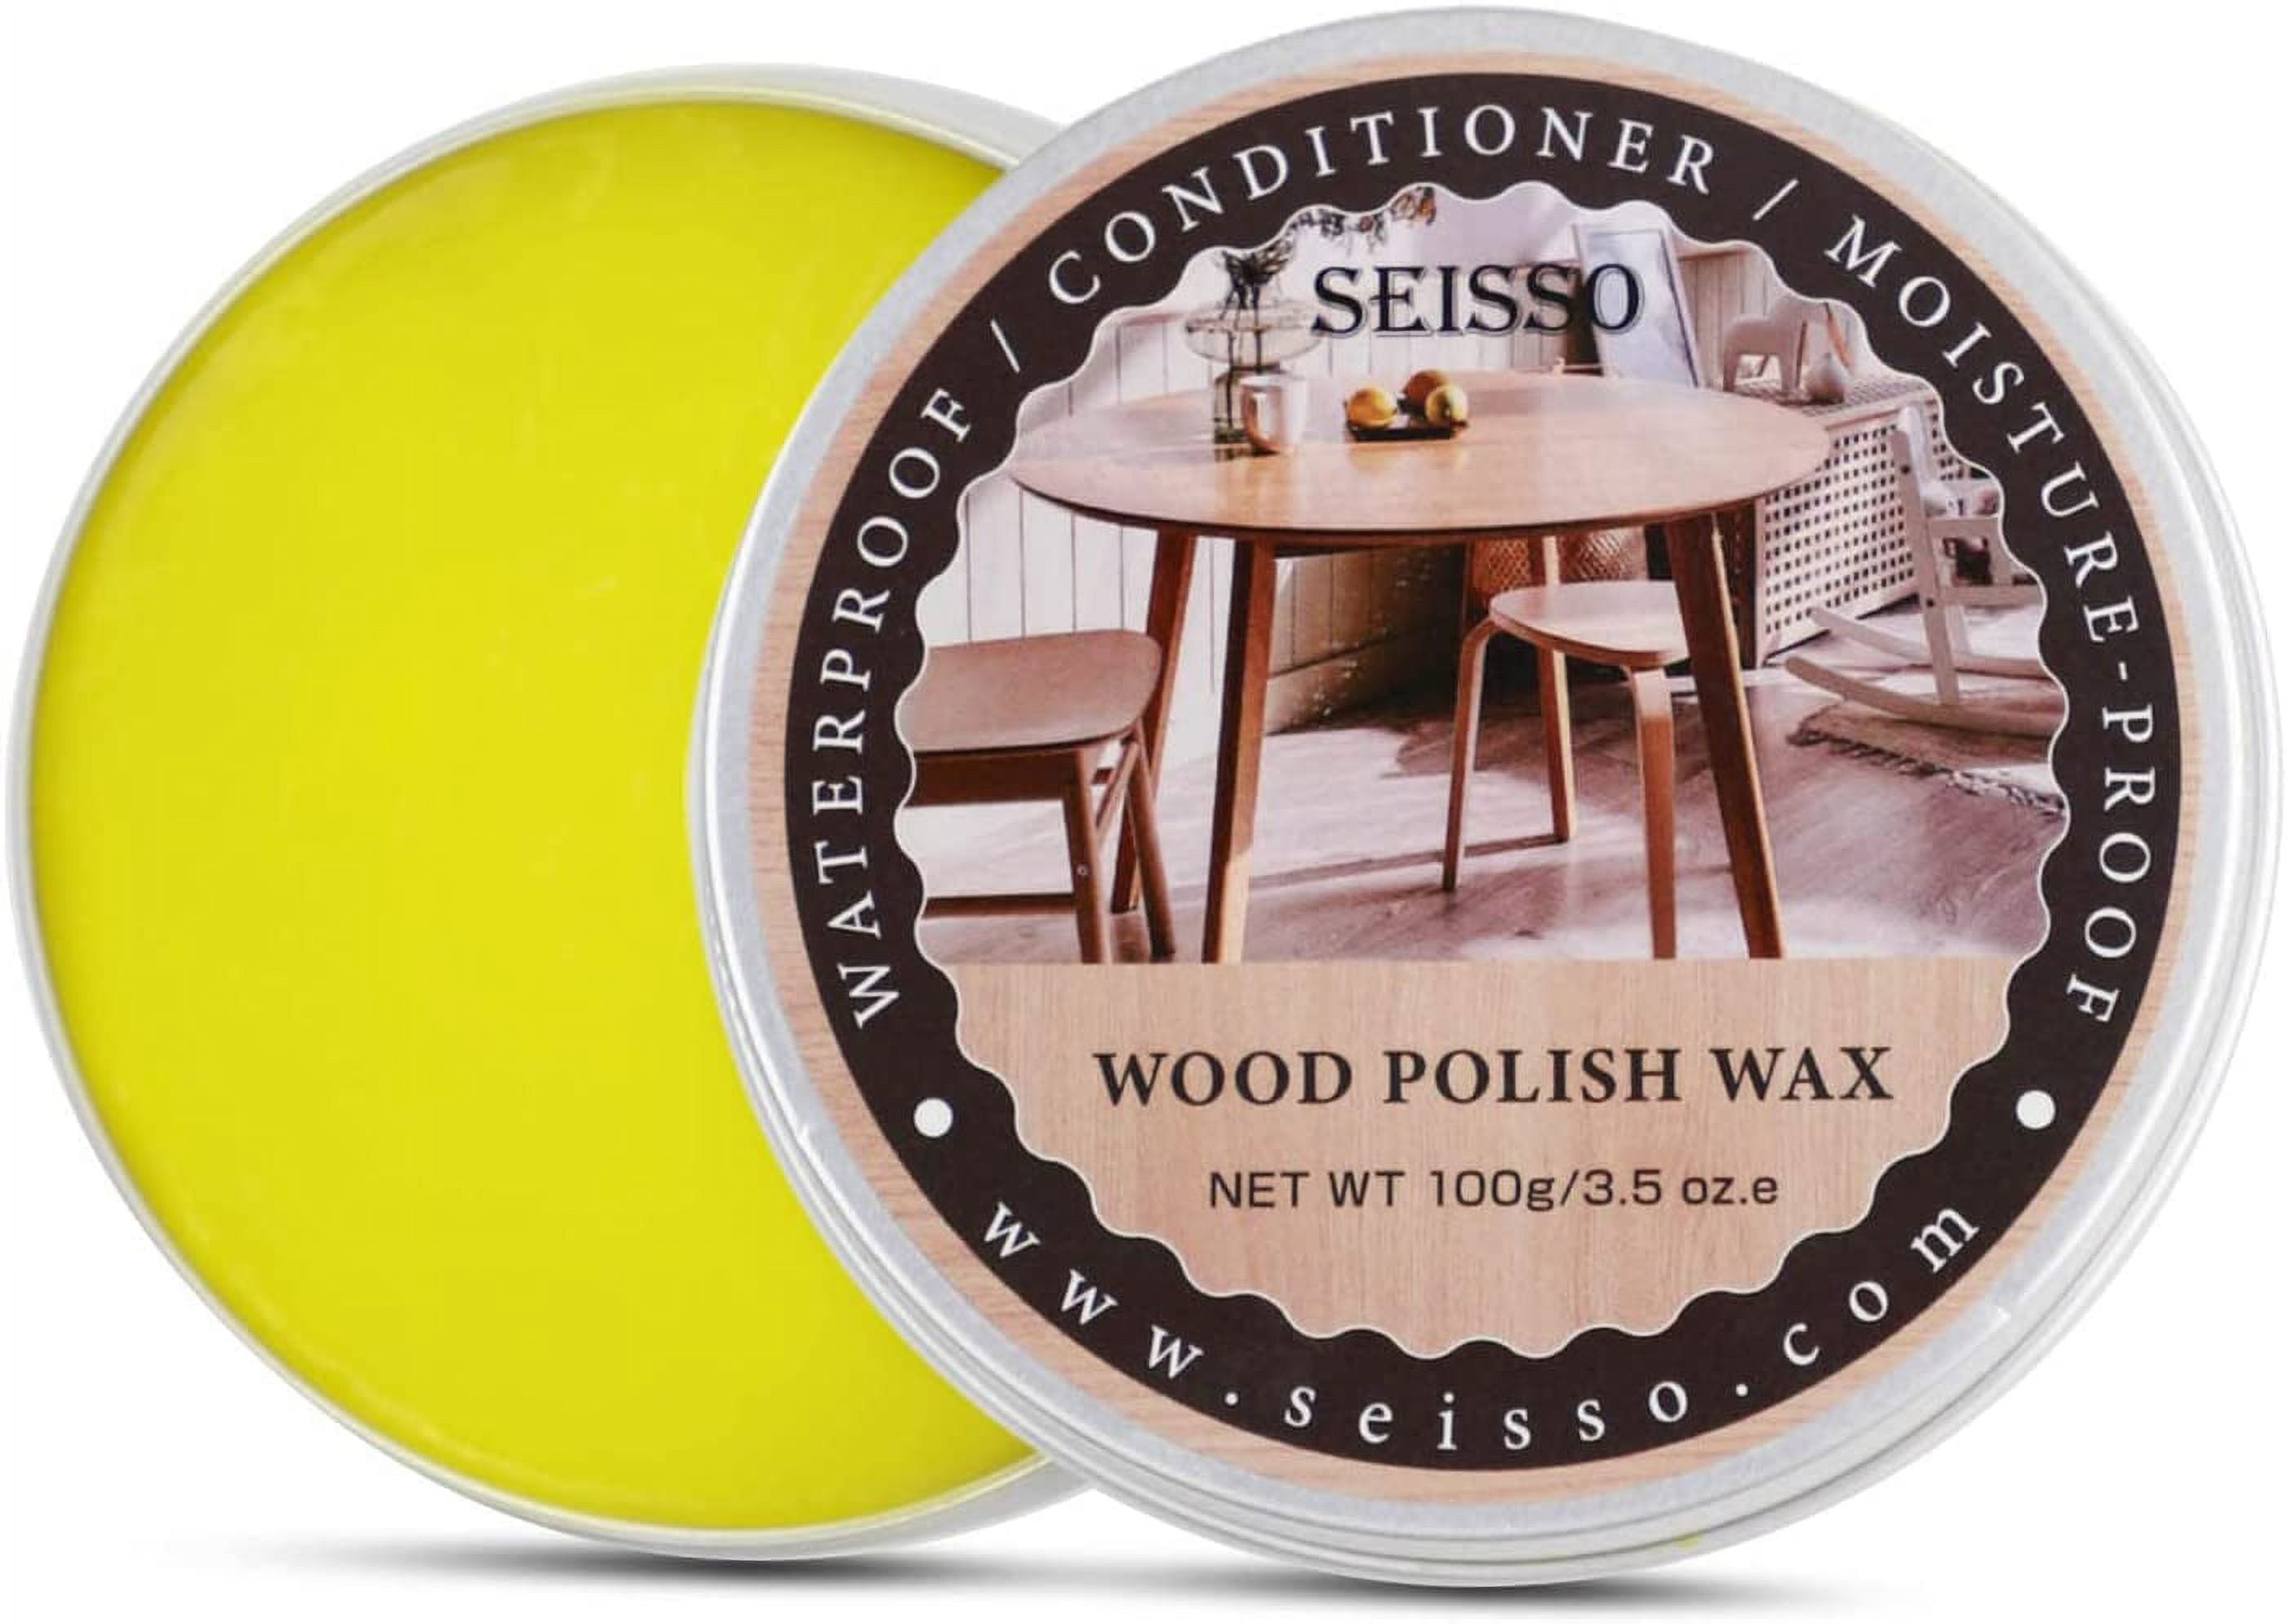 SEISSO Wood Polish Wax, Paste Wax for Wood Finish, Wood Wax Polish,  Conditioner, Cleaner, Restorer, Furniture Polish for Wooden Floors,  Cabinets